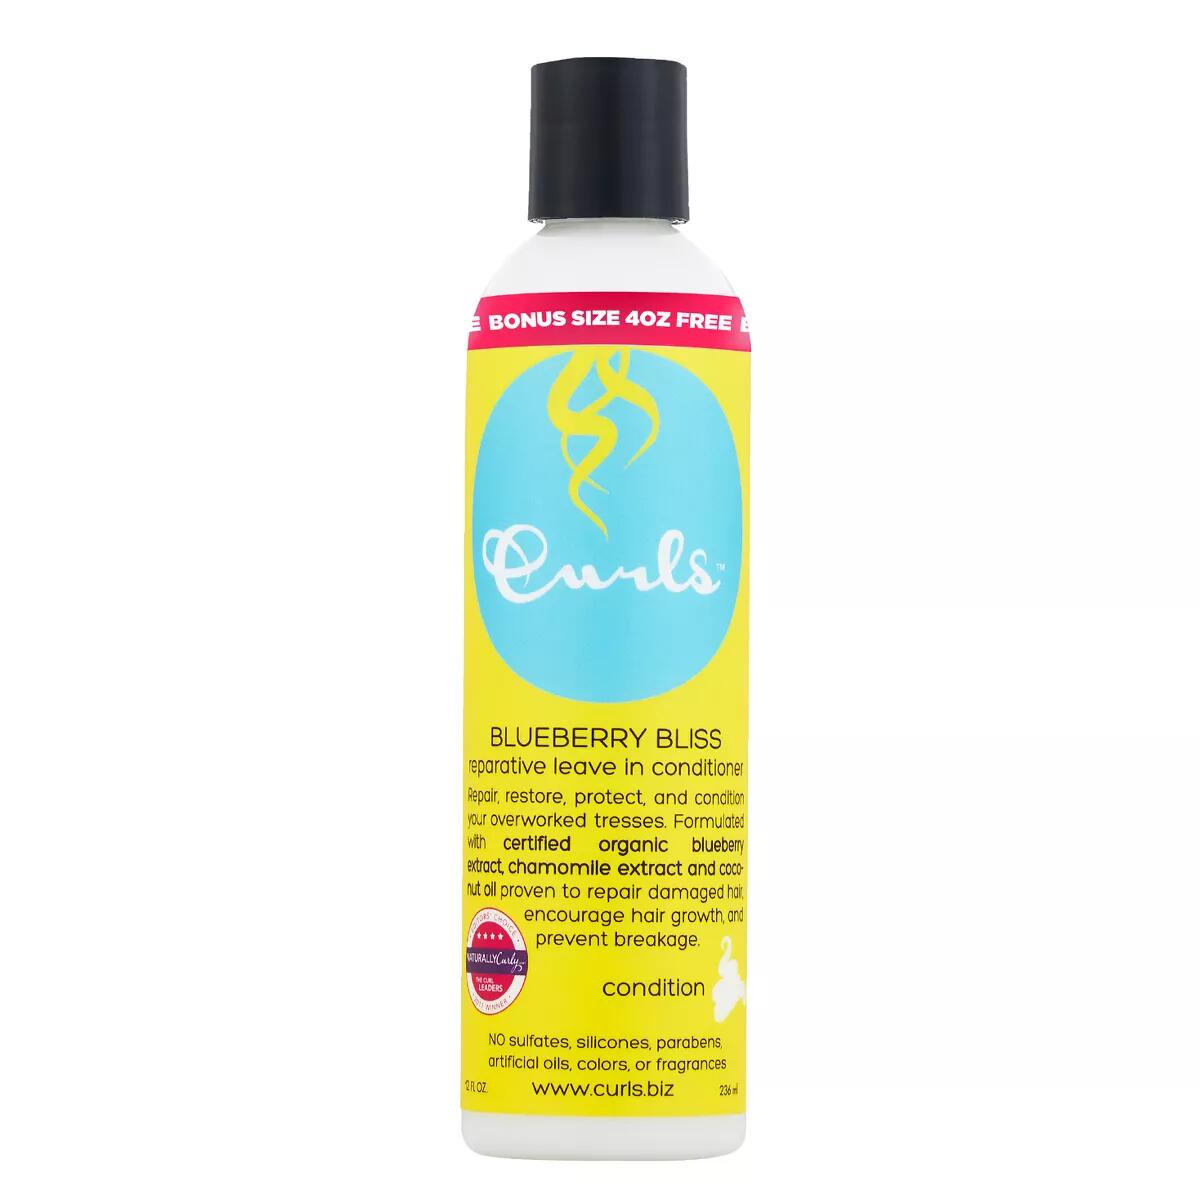 Curls Blueberry Leave-in Conditioner - 8 fl oz